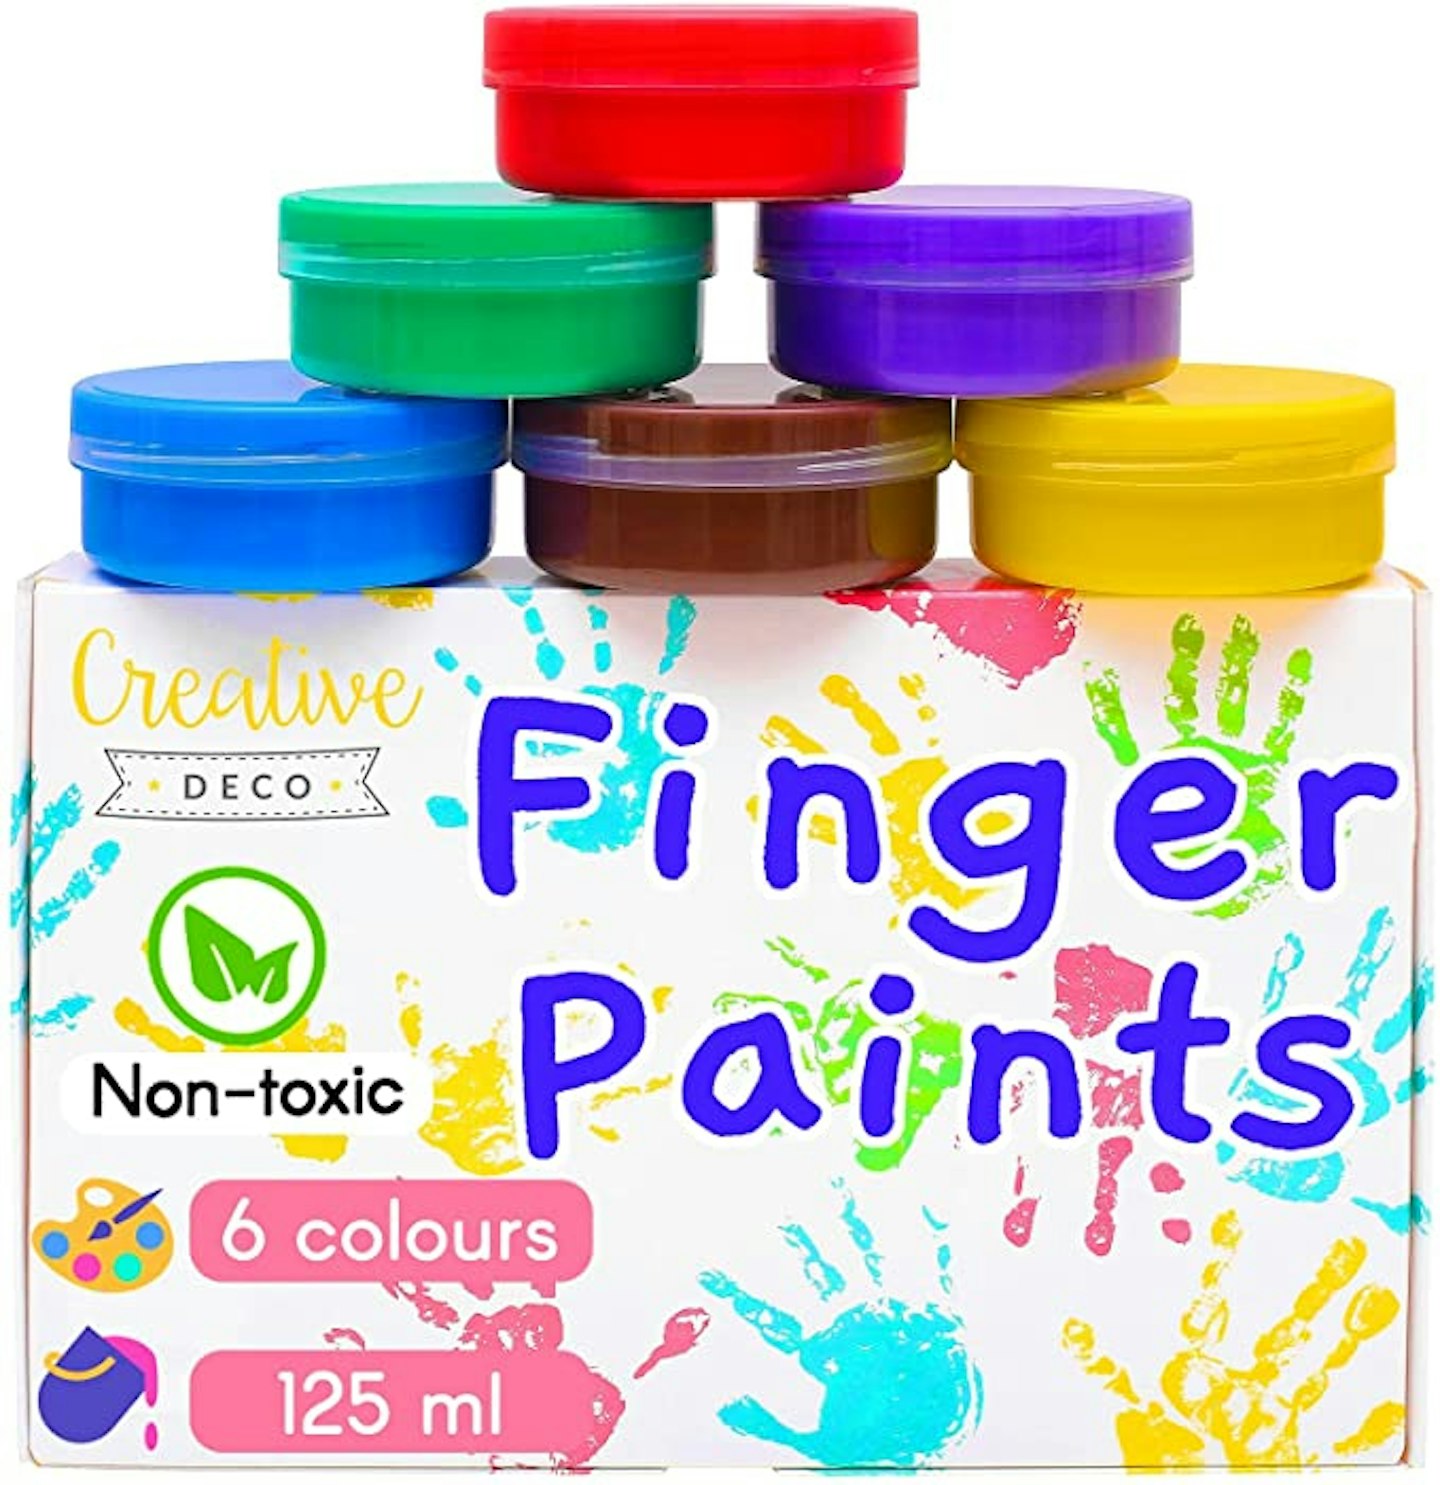 U.S. Art Supply 18 Color Children's Washable Tempera Paint Set - 2 Ounce  Wide Mouth Bottles for Arts, Crafts and Posters 